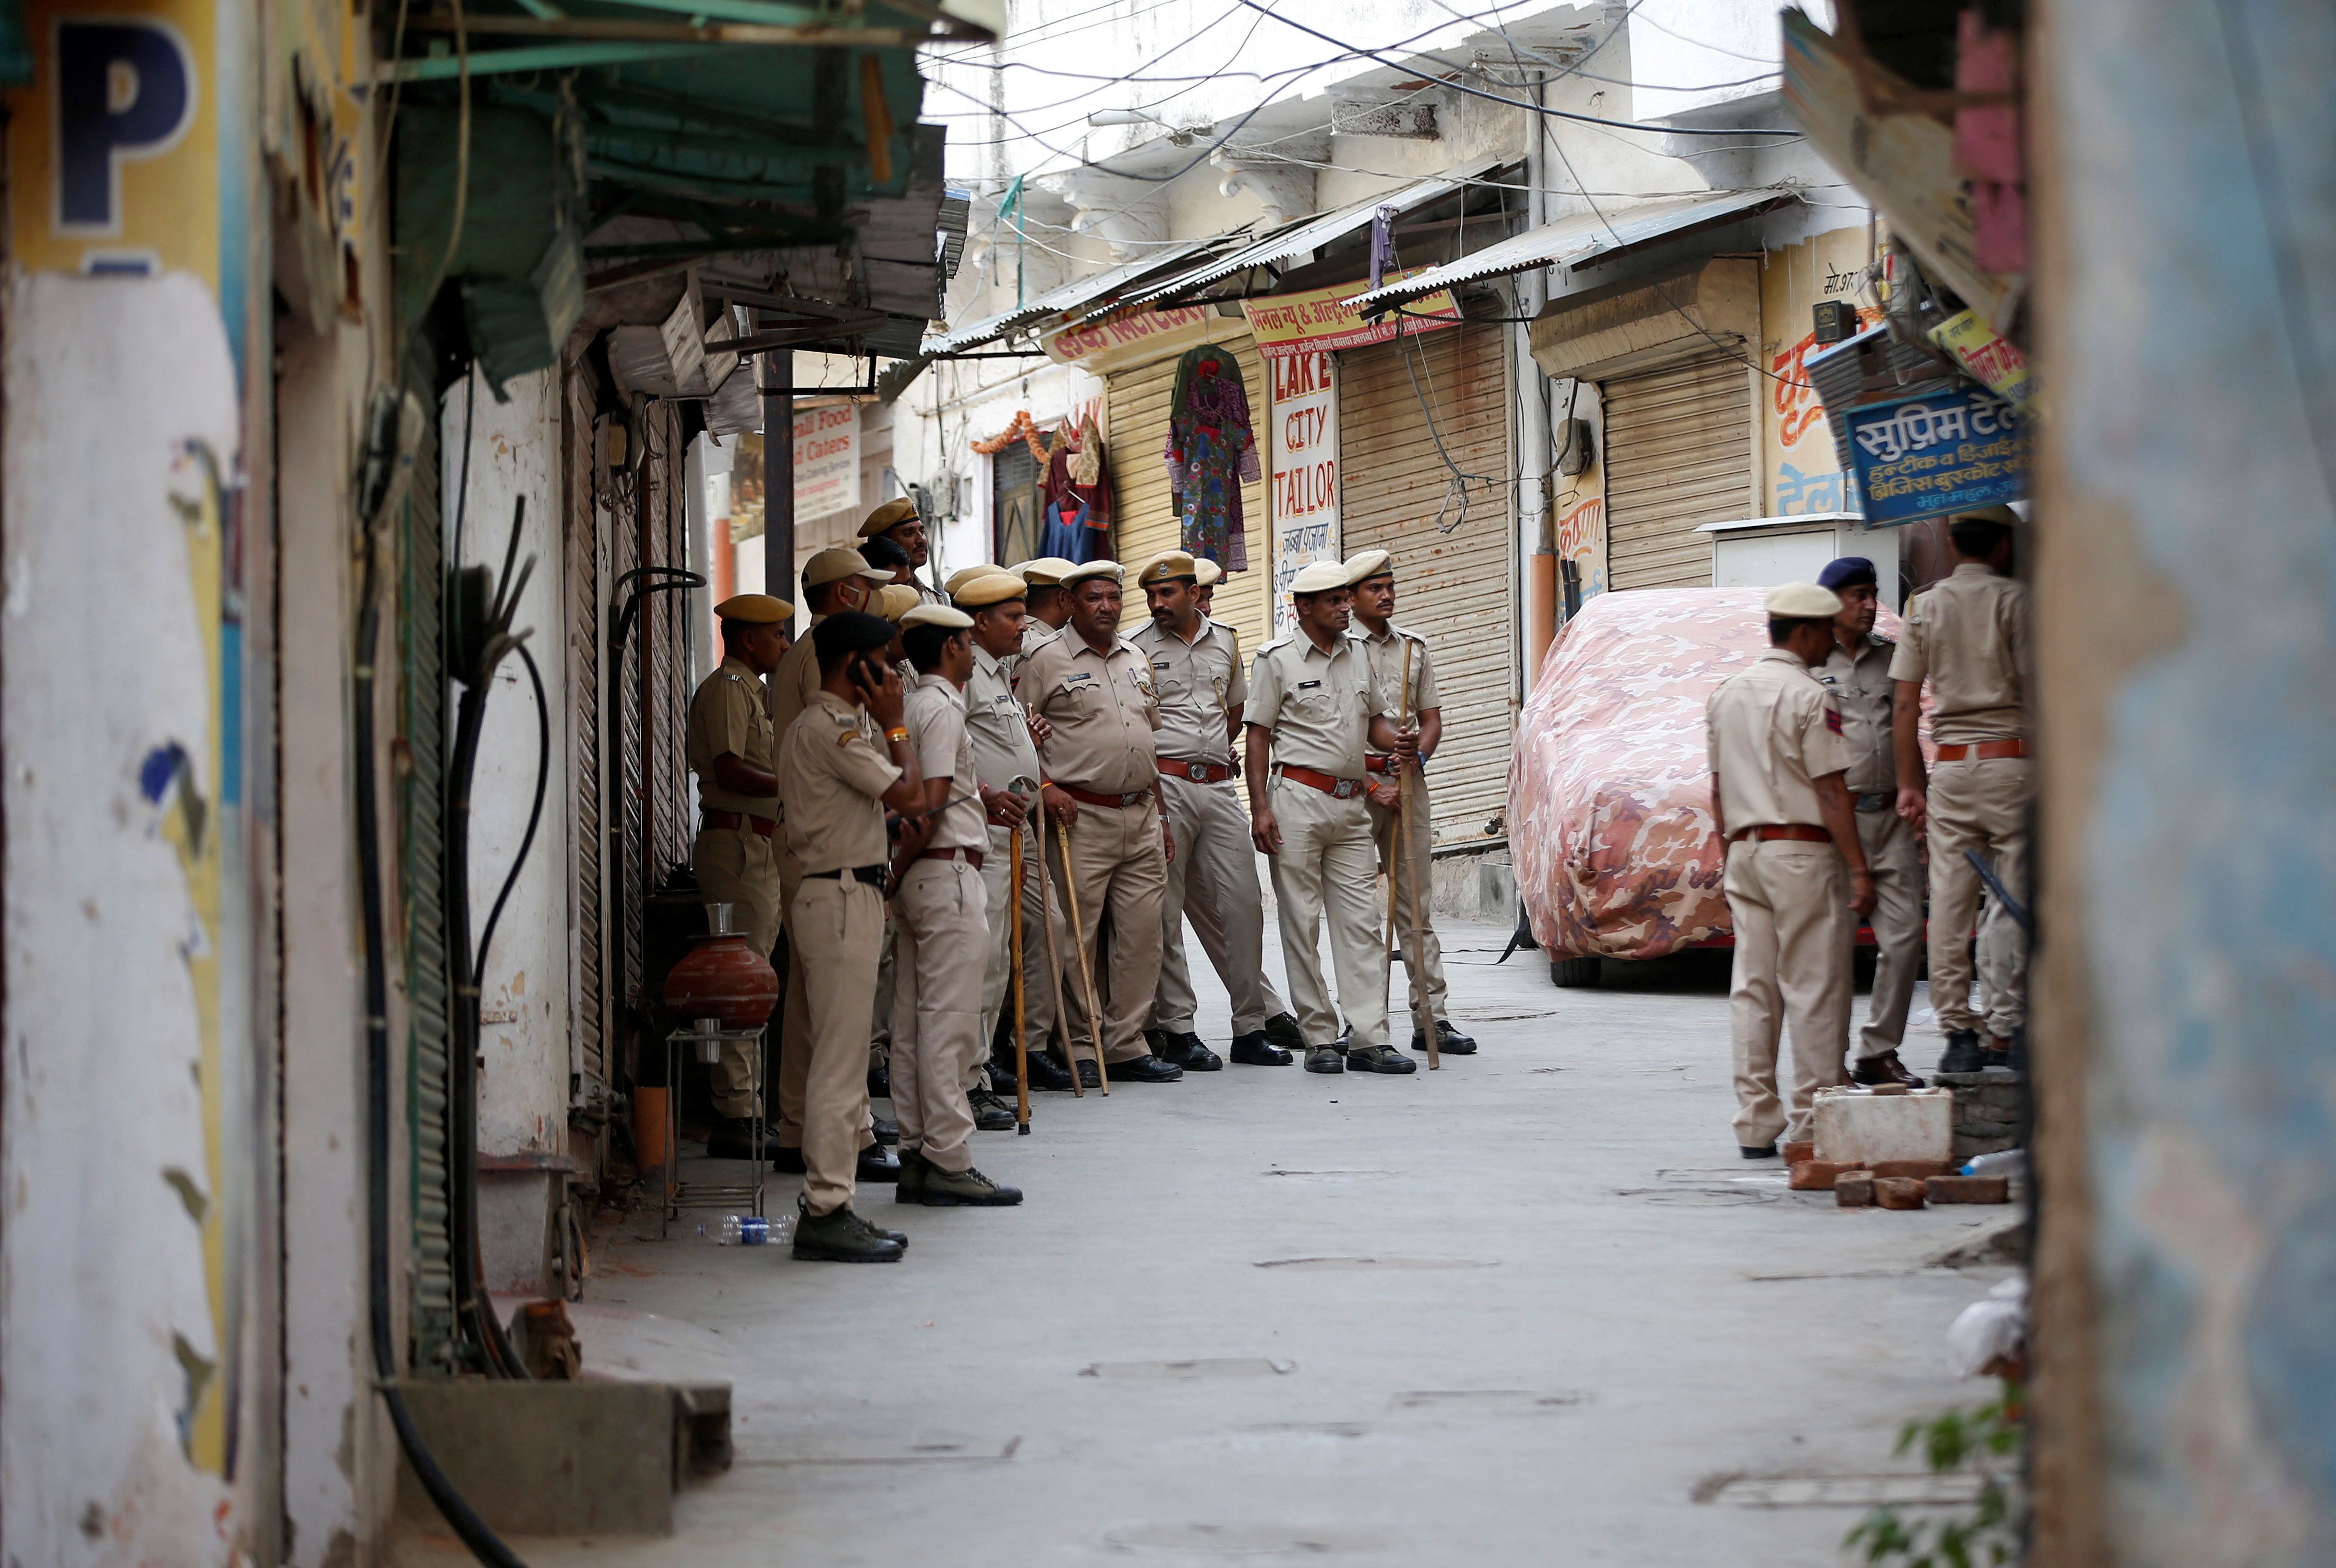 3 arrested for hate speech in Rajasthan's Ajmer; link with Udaipur tailor's murder probed: Police